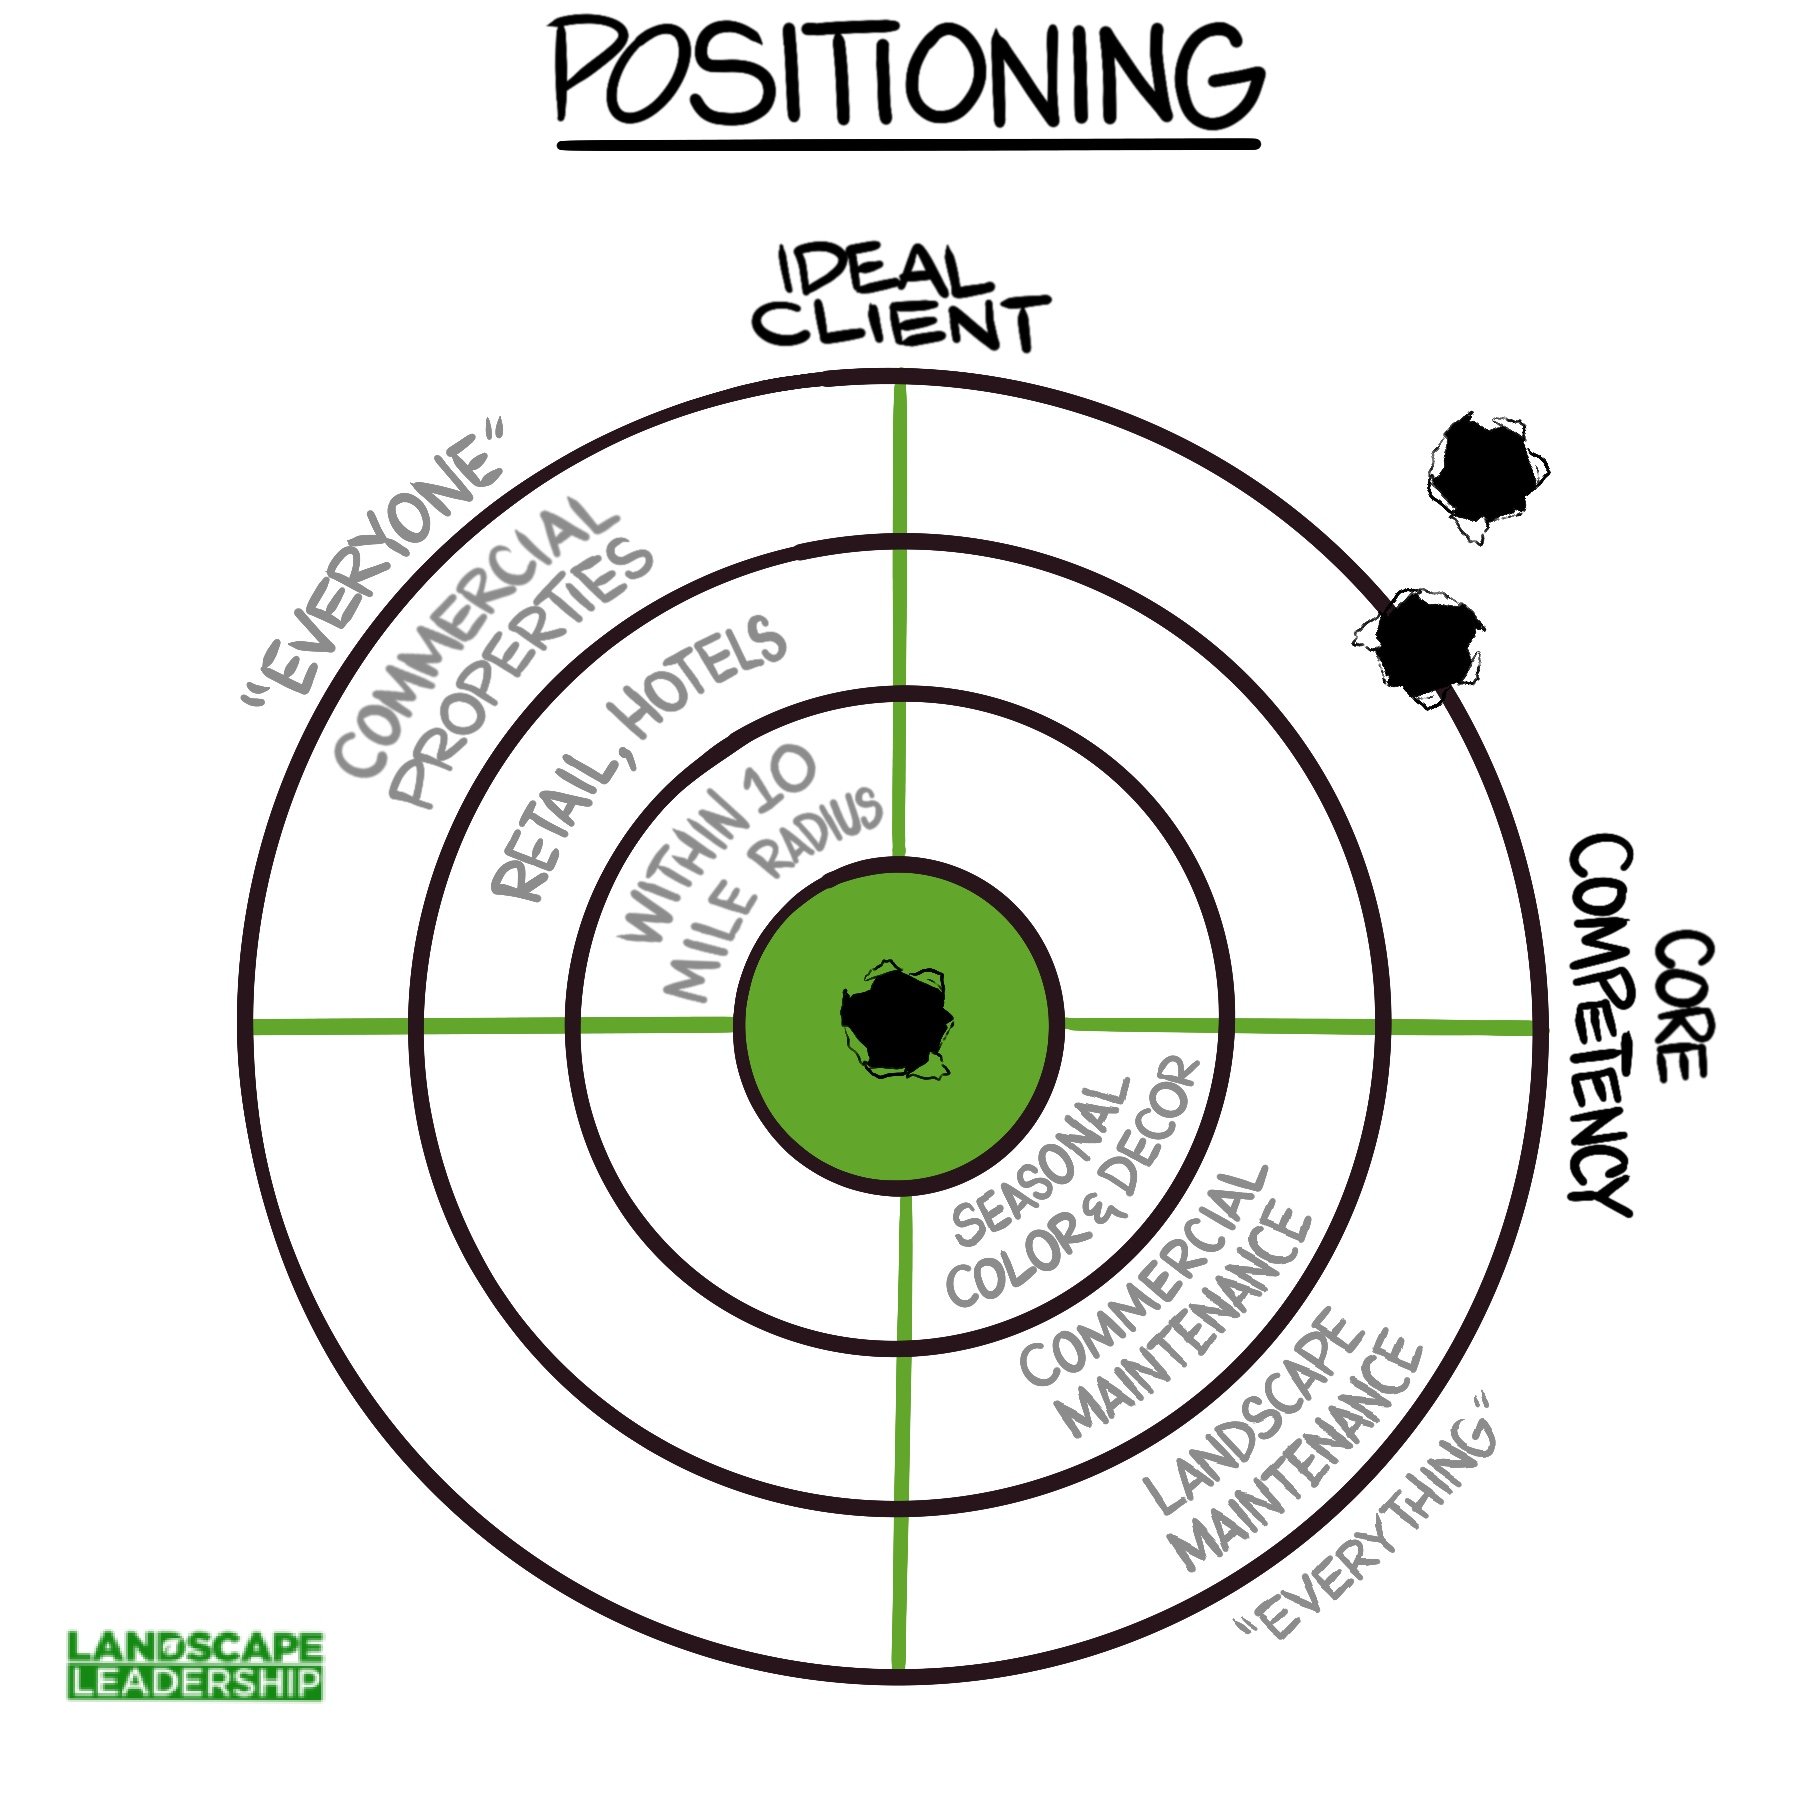 Positioning-ideal-client-core-competency